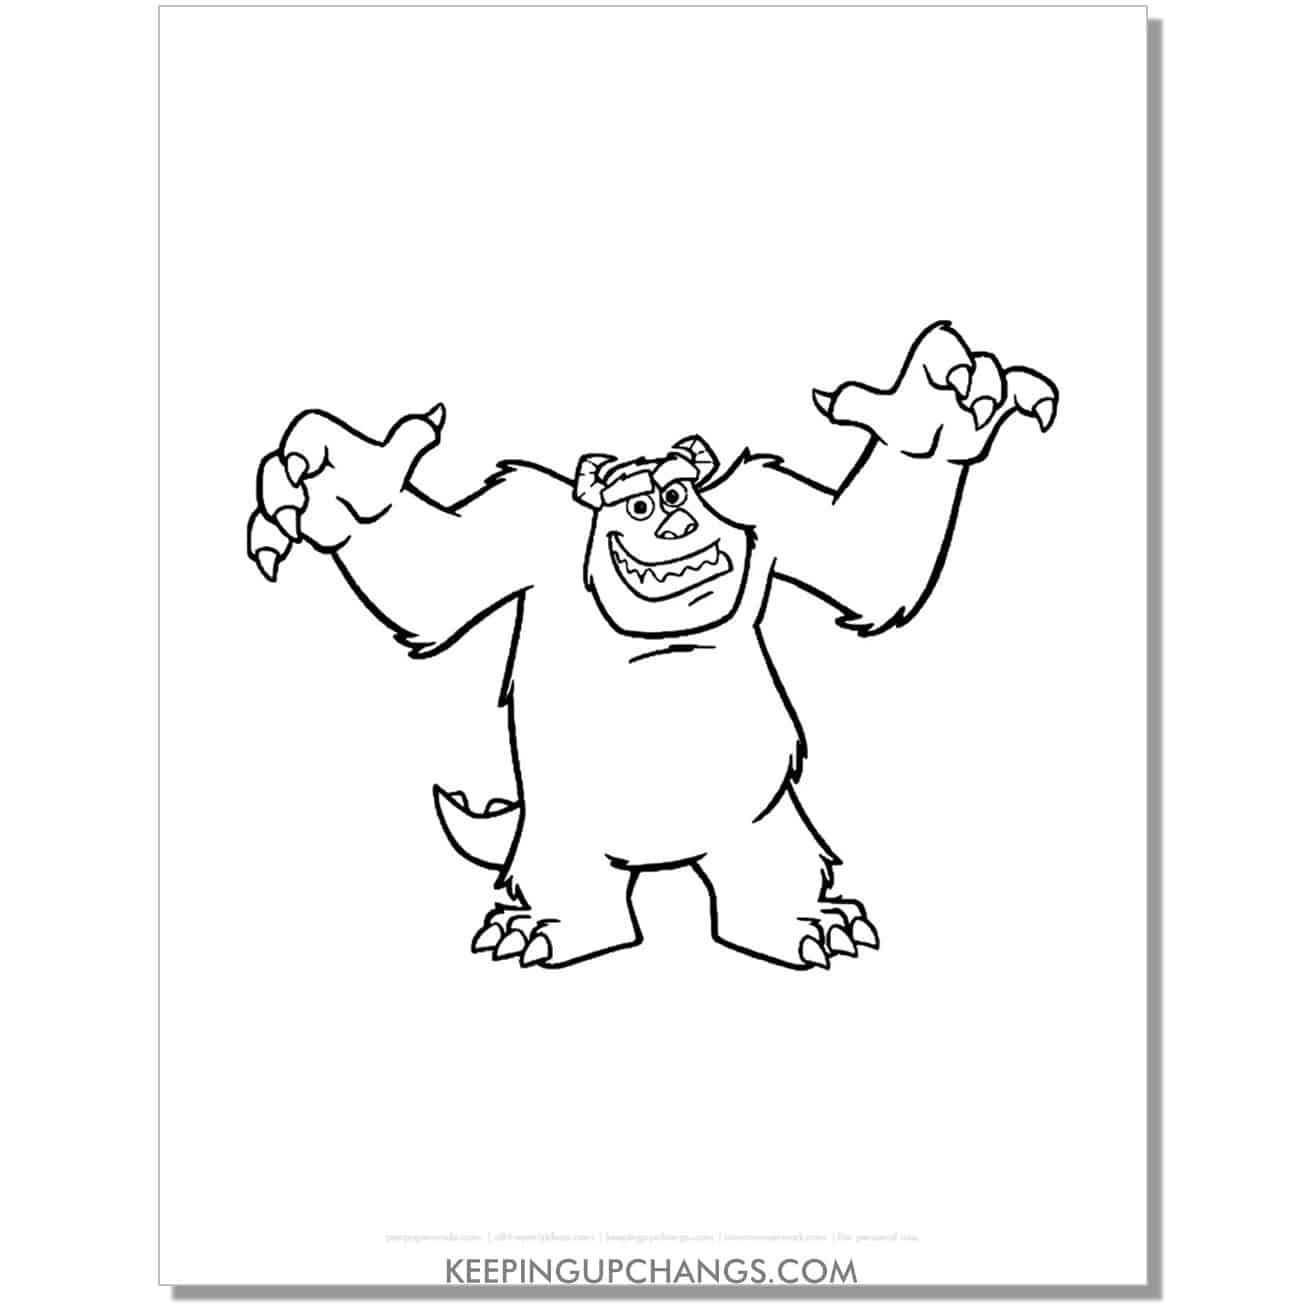 sullivan with arms up monsters inc coloring page, sheet.